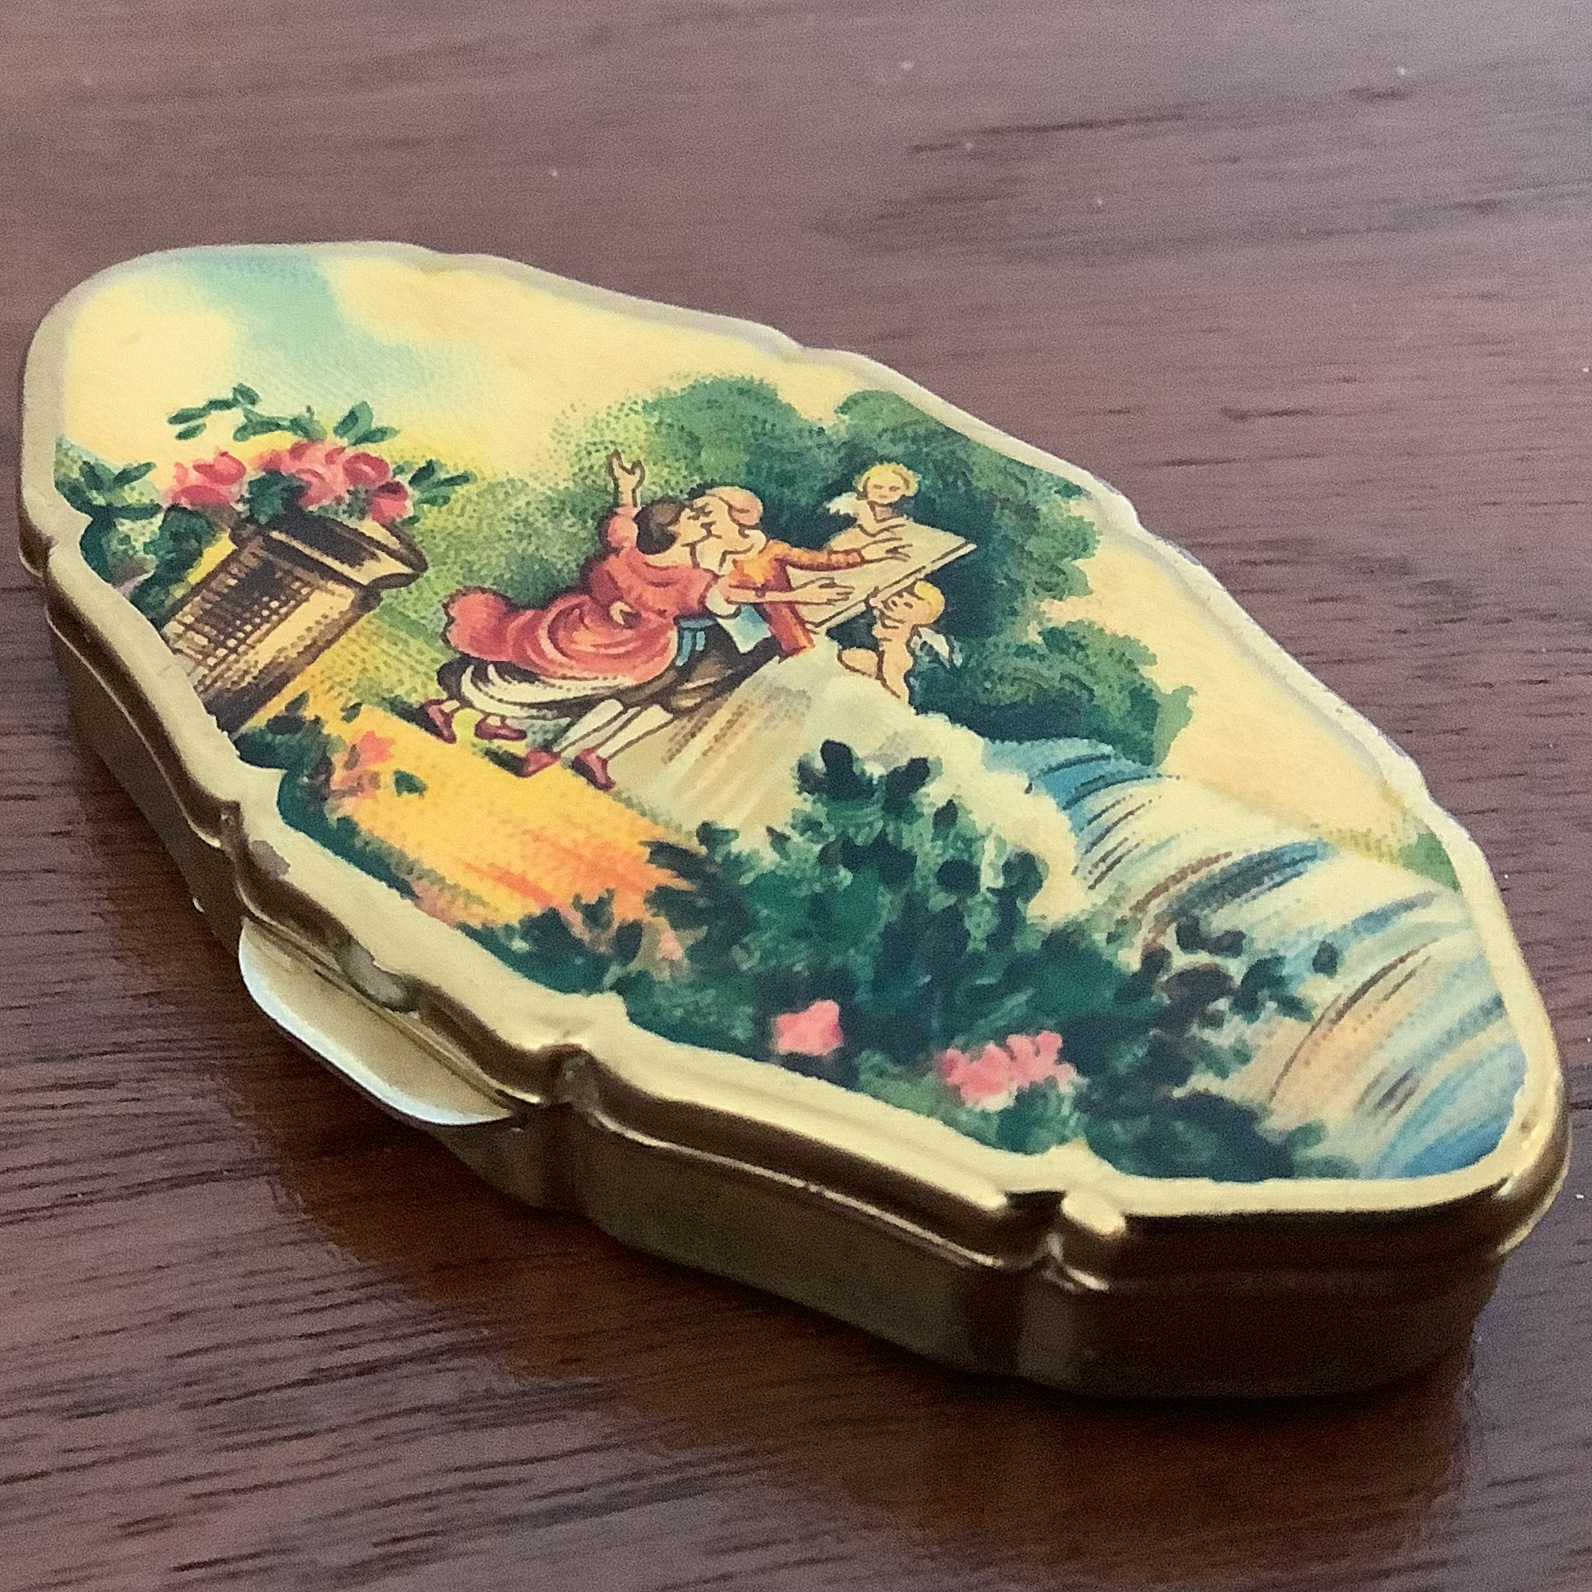 Closed pill box with gold-toned metal edges and pastoral scene printed on top